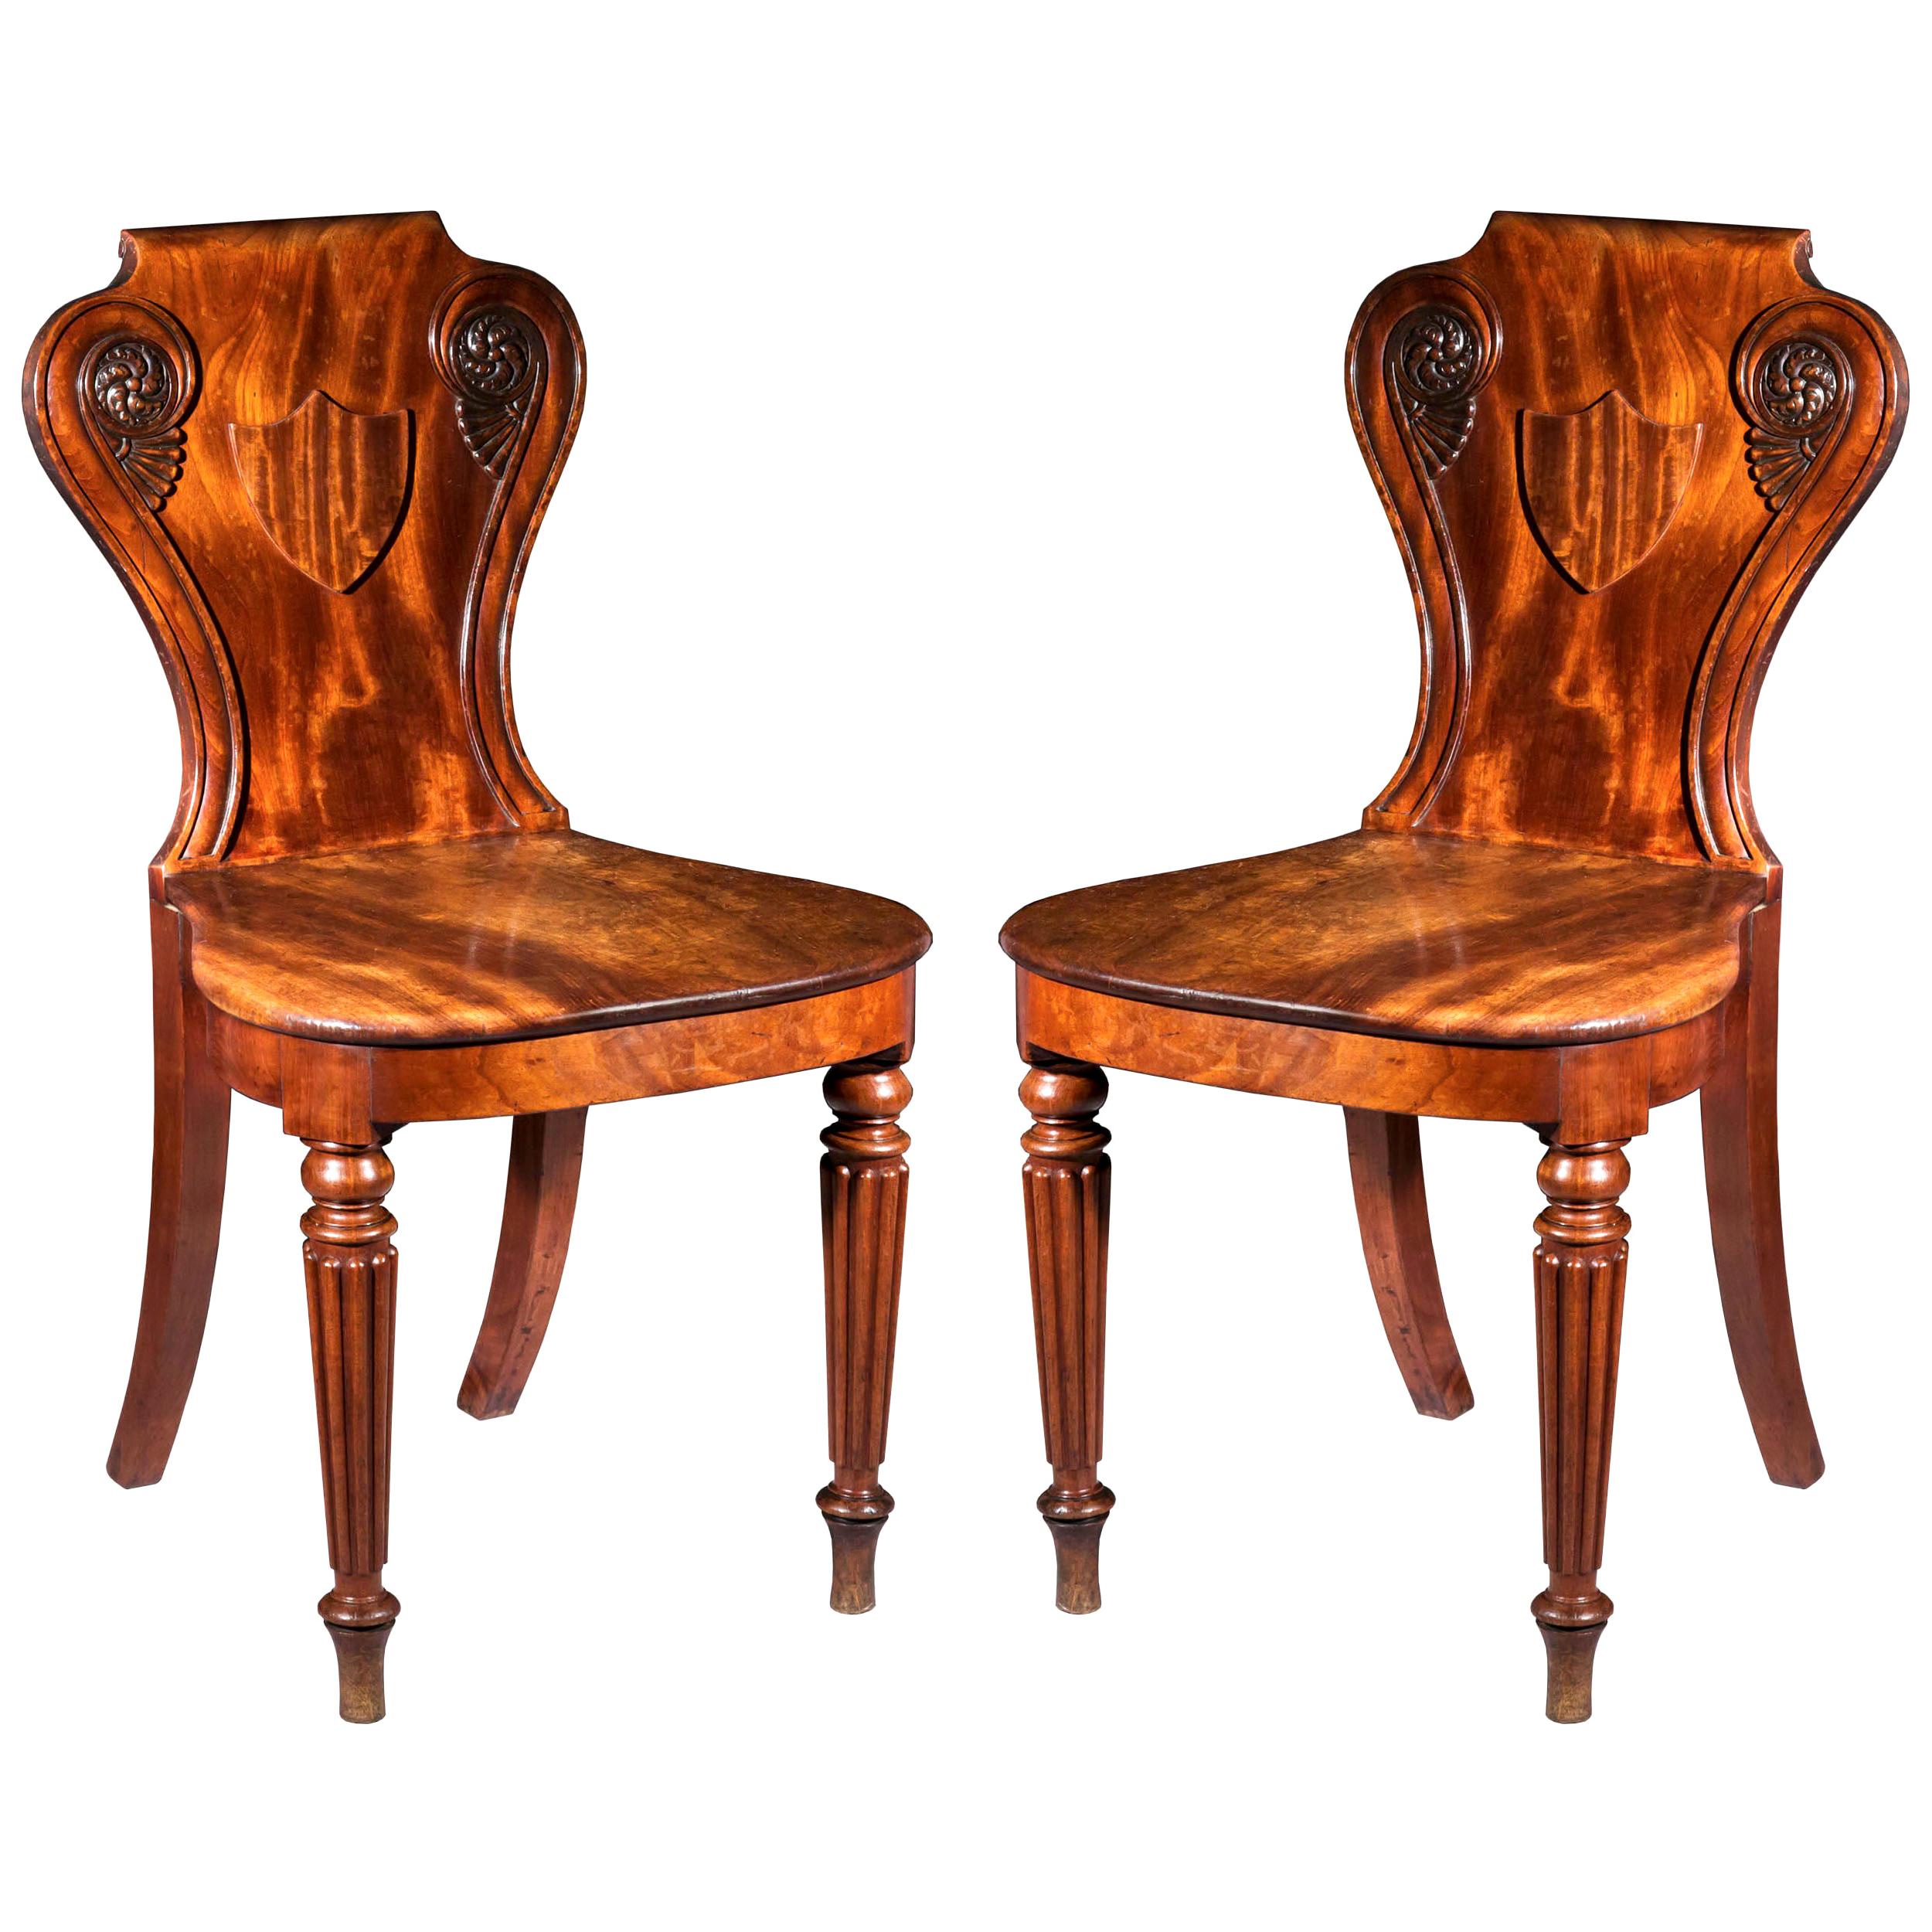 Pair of Antique Regency Hall Chairs Attributed to Gillows of Lancaster, c. 1815